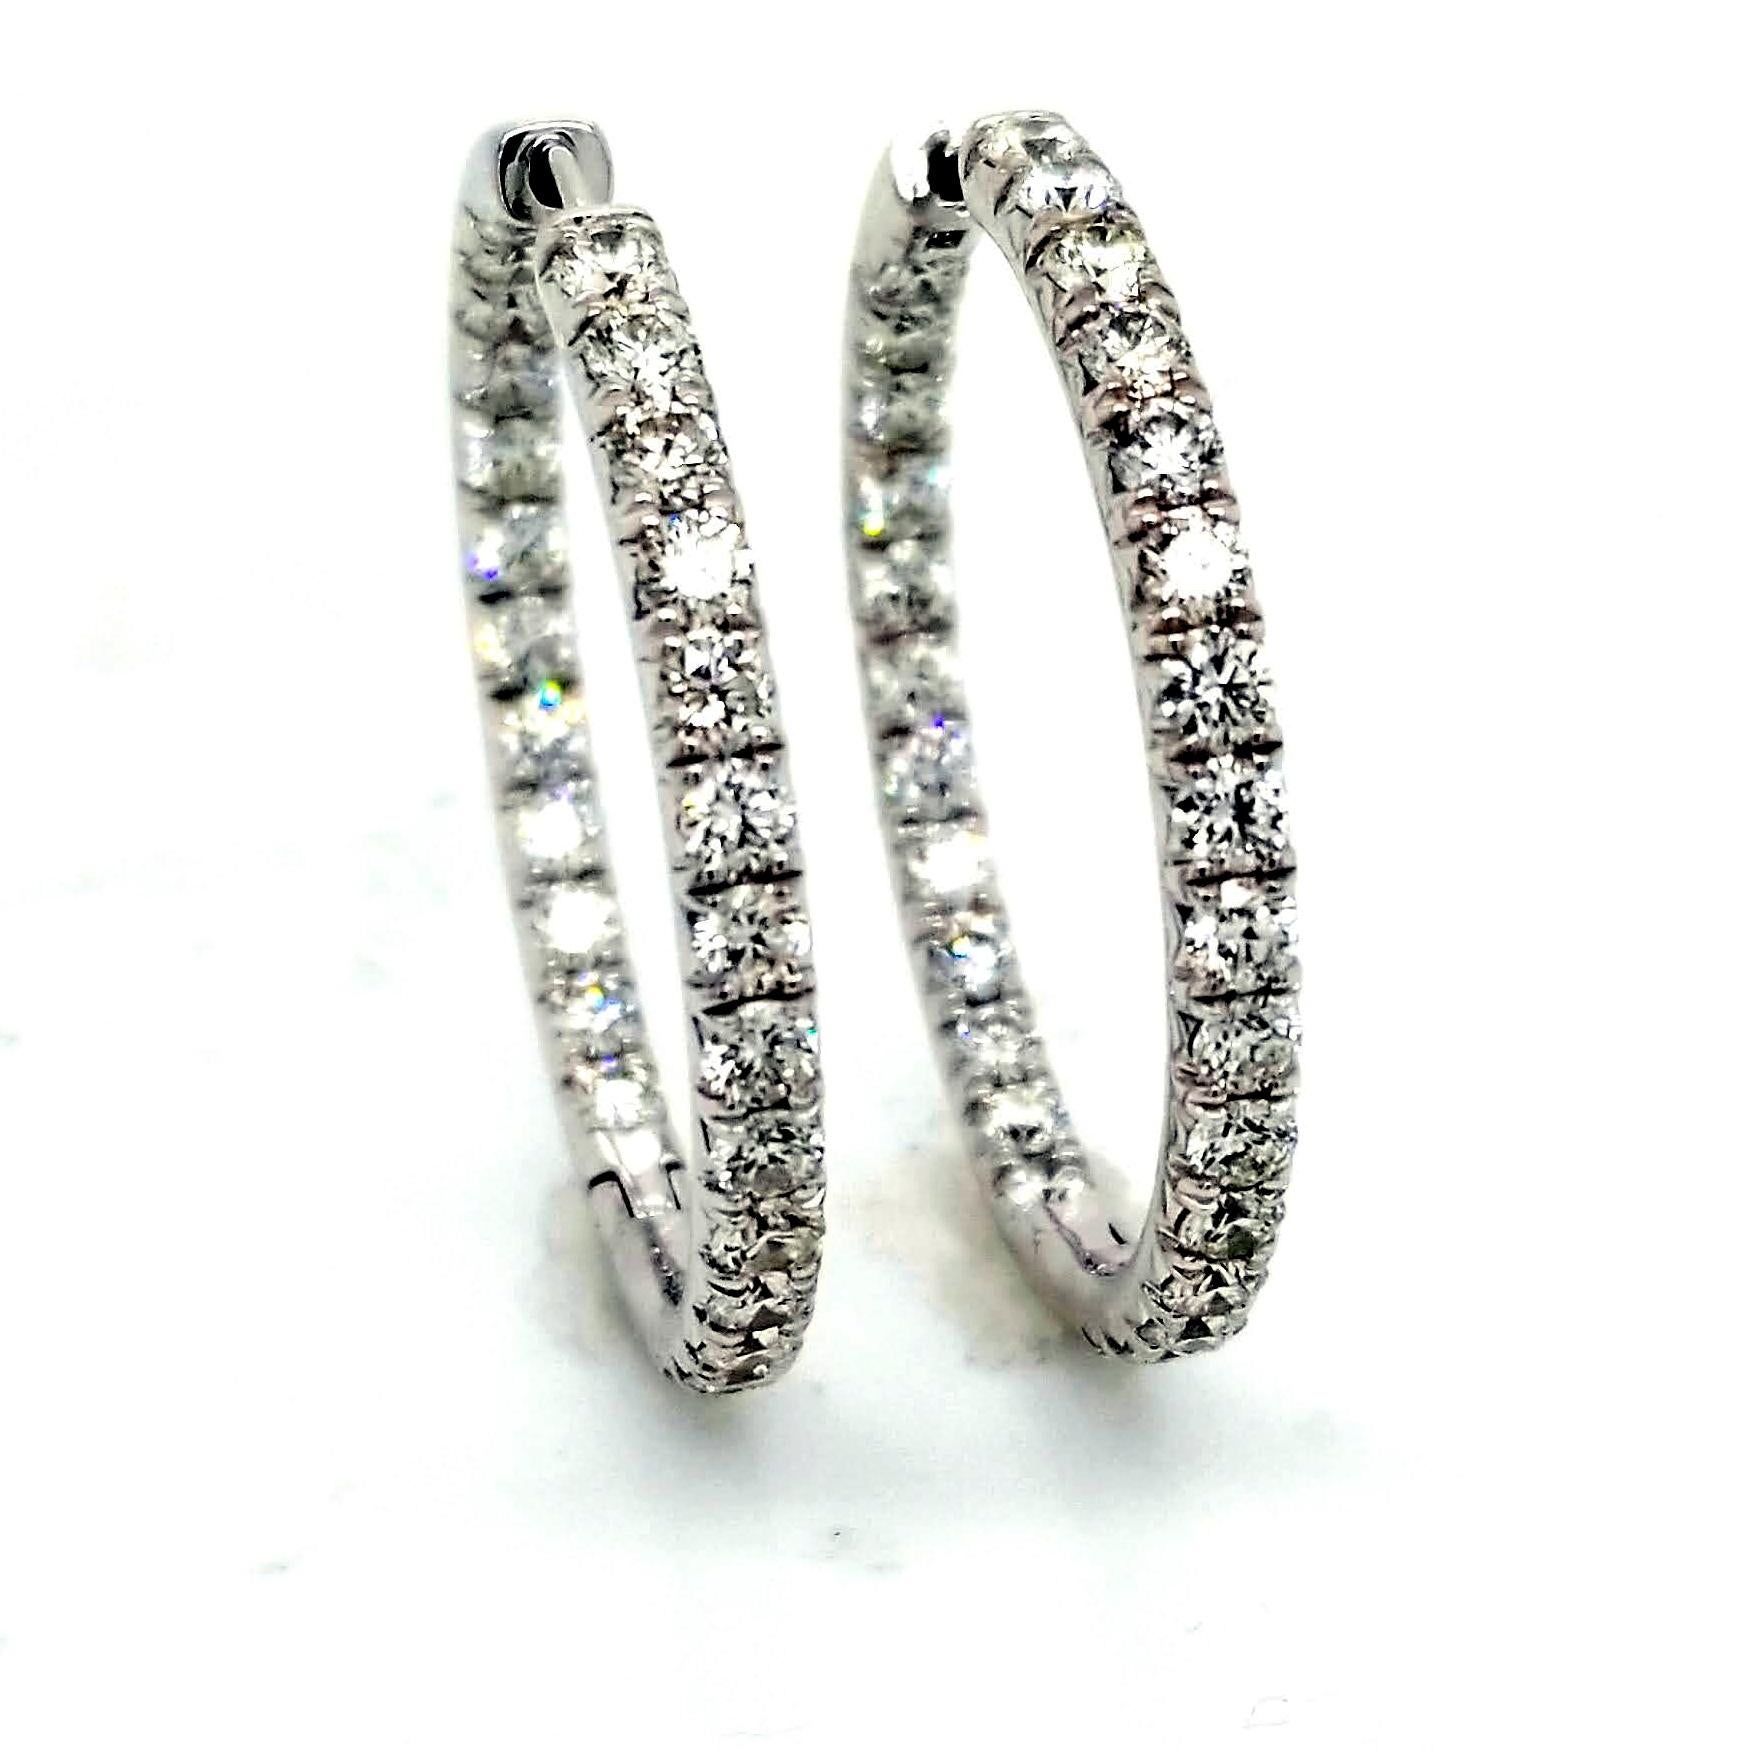 This beautiful 14K Gold Inside/Outside hoop earrings has 56 round brilliant diamonds with total weight of 4.89 Ct set in French Pave style for maximum brilliance. The earring is 35 Millimeters (mm) in diameter.
Metal: 14K White Gold - 14.80 gr